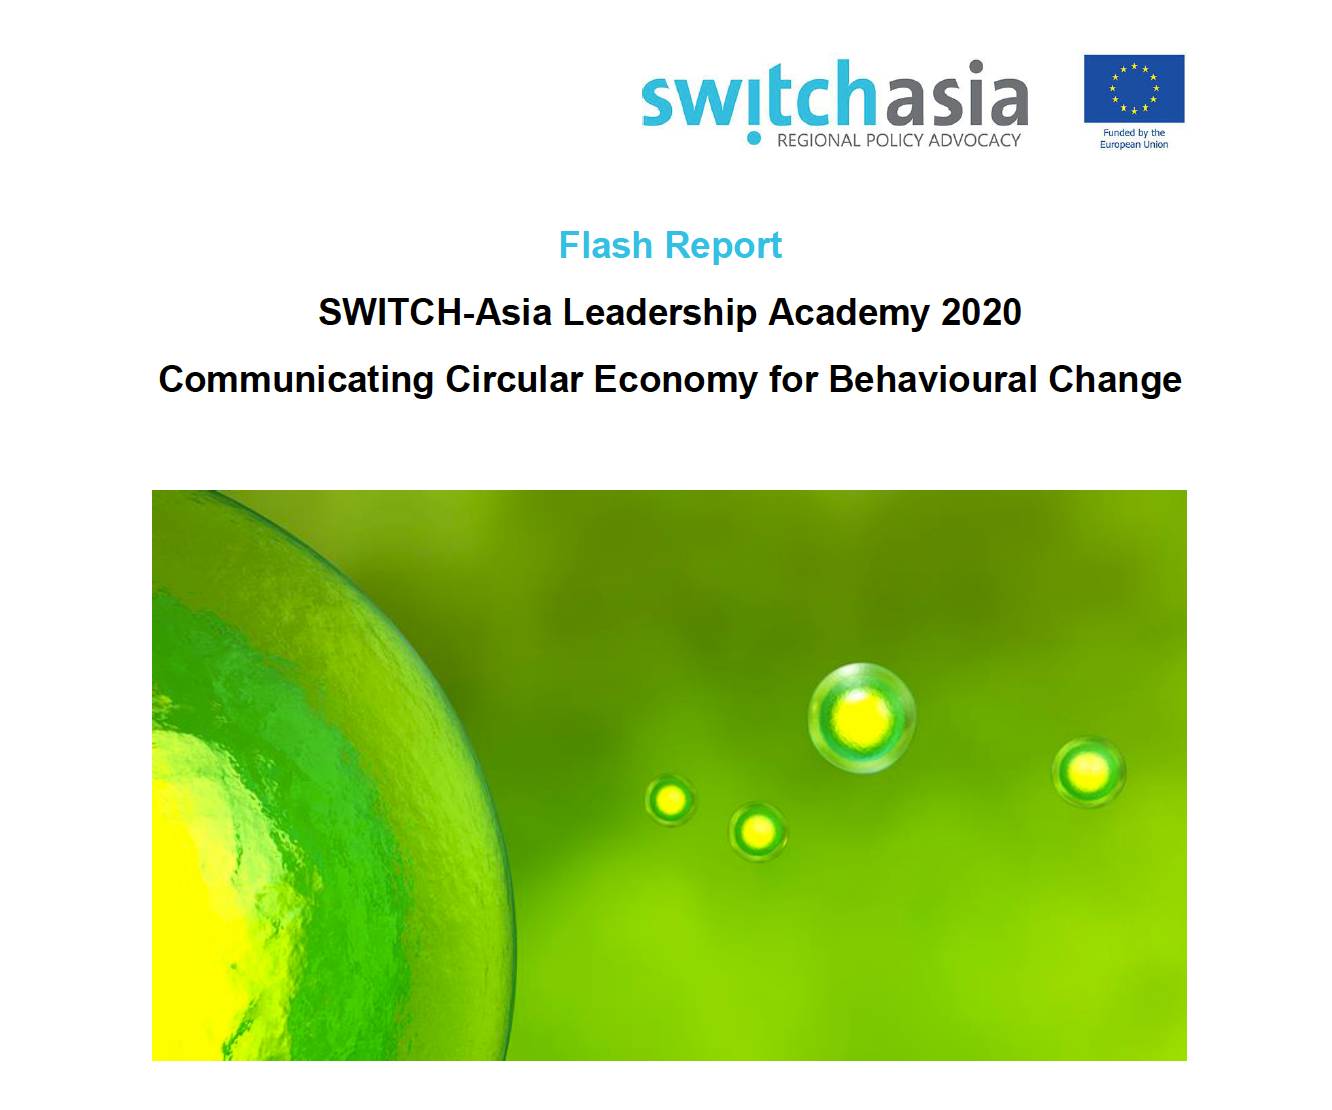 SWITCH-Asia Leadership Academy 2020: Communicating Circular Economy for Behavioural Change